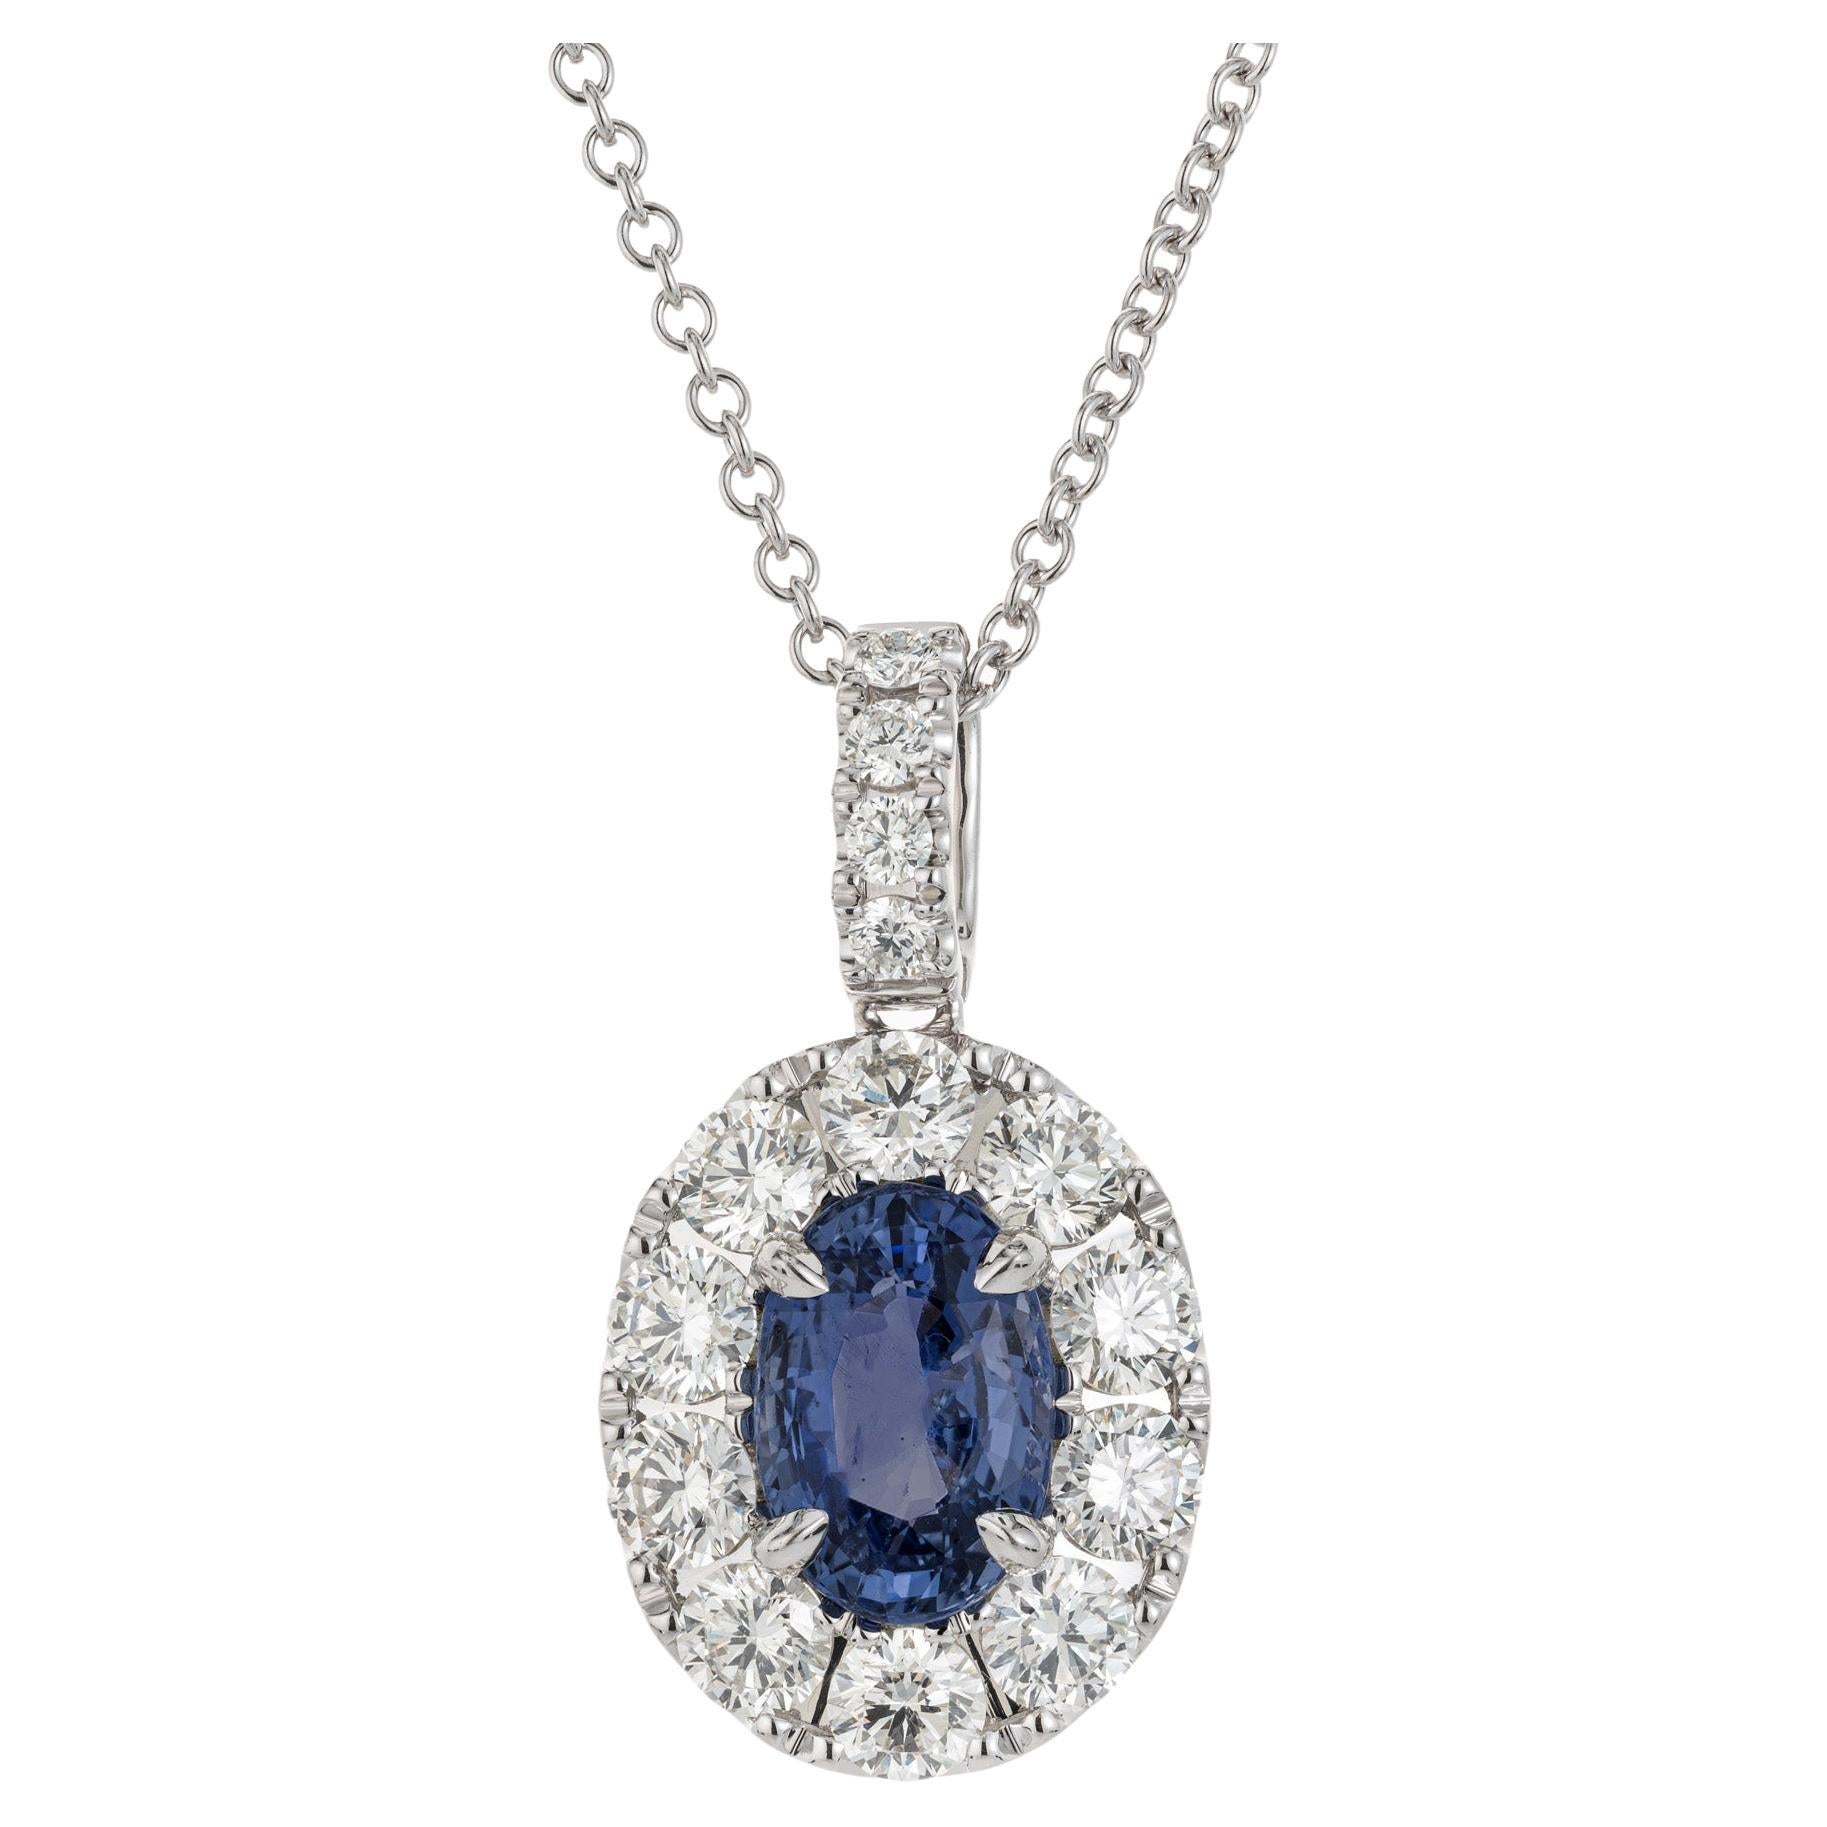 Peter Suchy GIA Certified 3.04 Carat Sapphire Diamond Gold Pendant Necklace For Sale